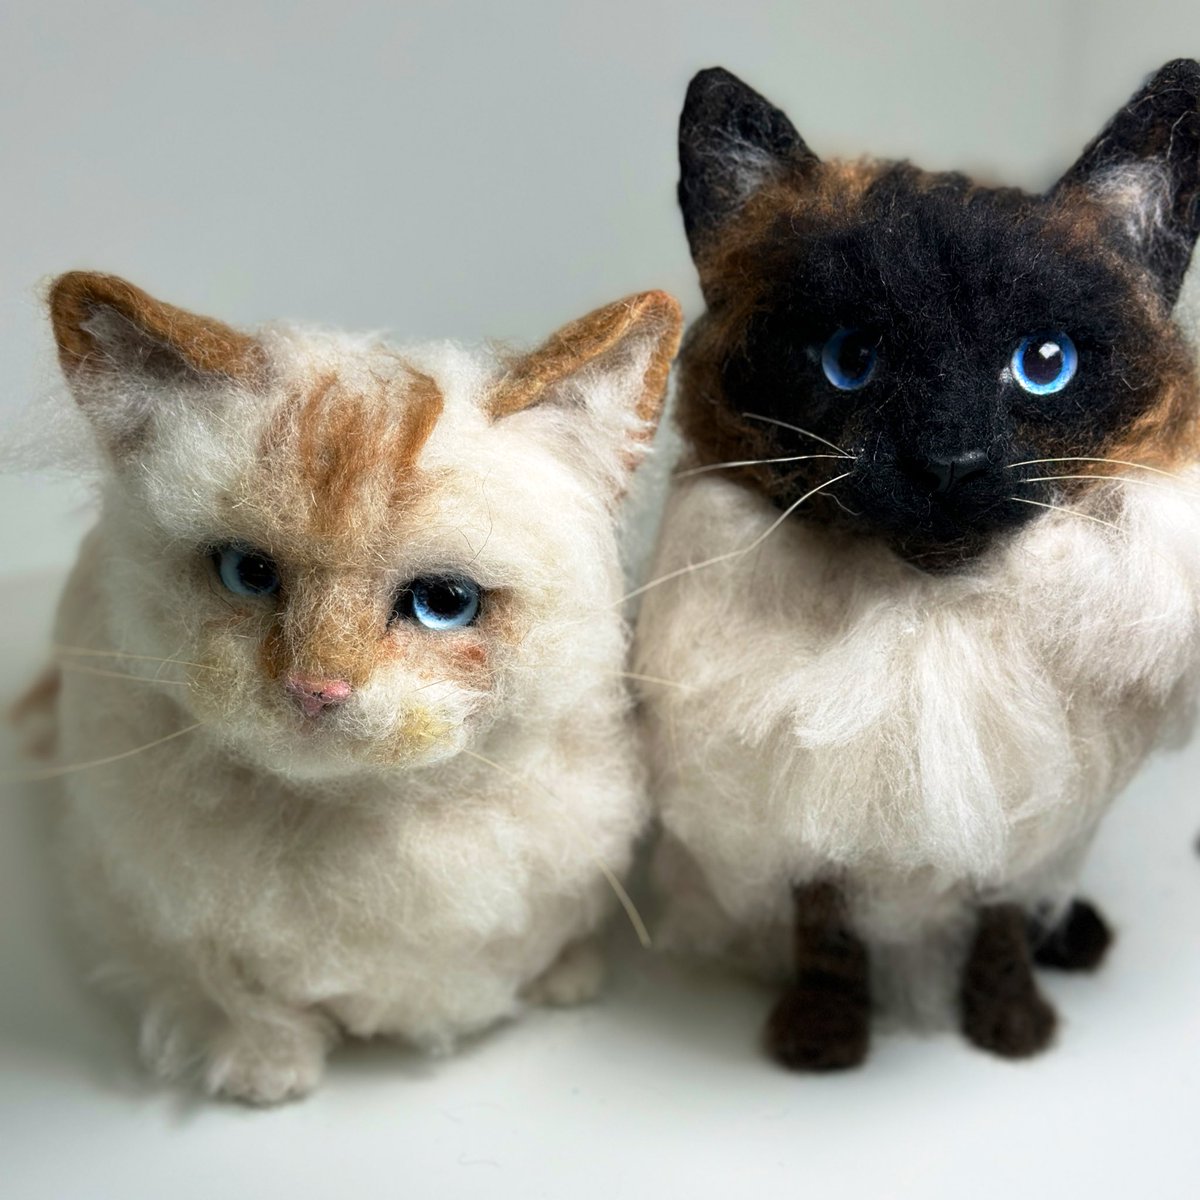 Can share this pair of needle felted of Ragdoll cats - delighted the recipients loved them and they had to give them early as a present as they just couldn’t wait to gift them!